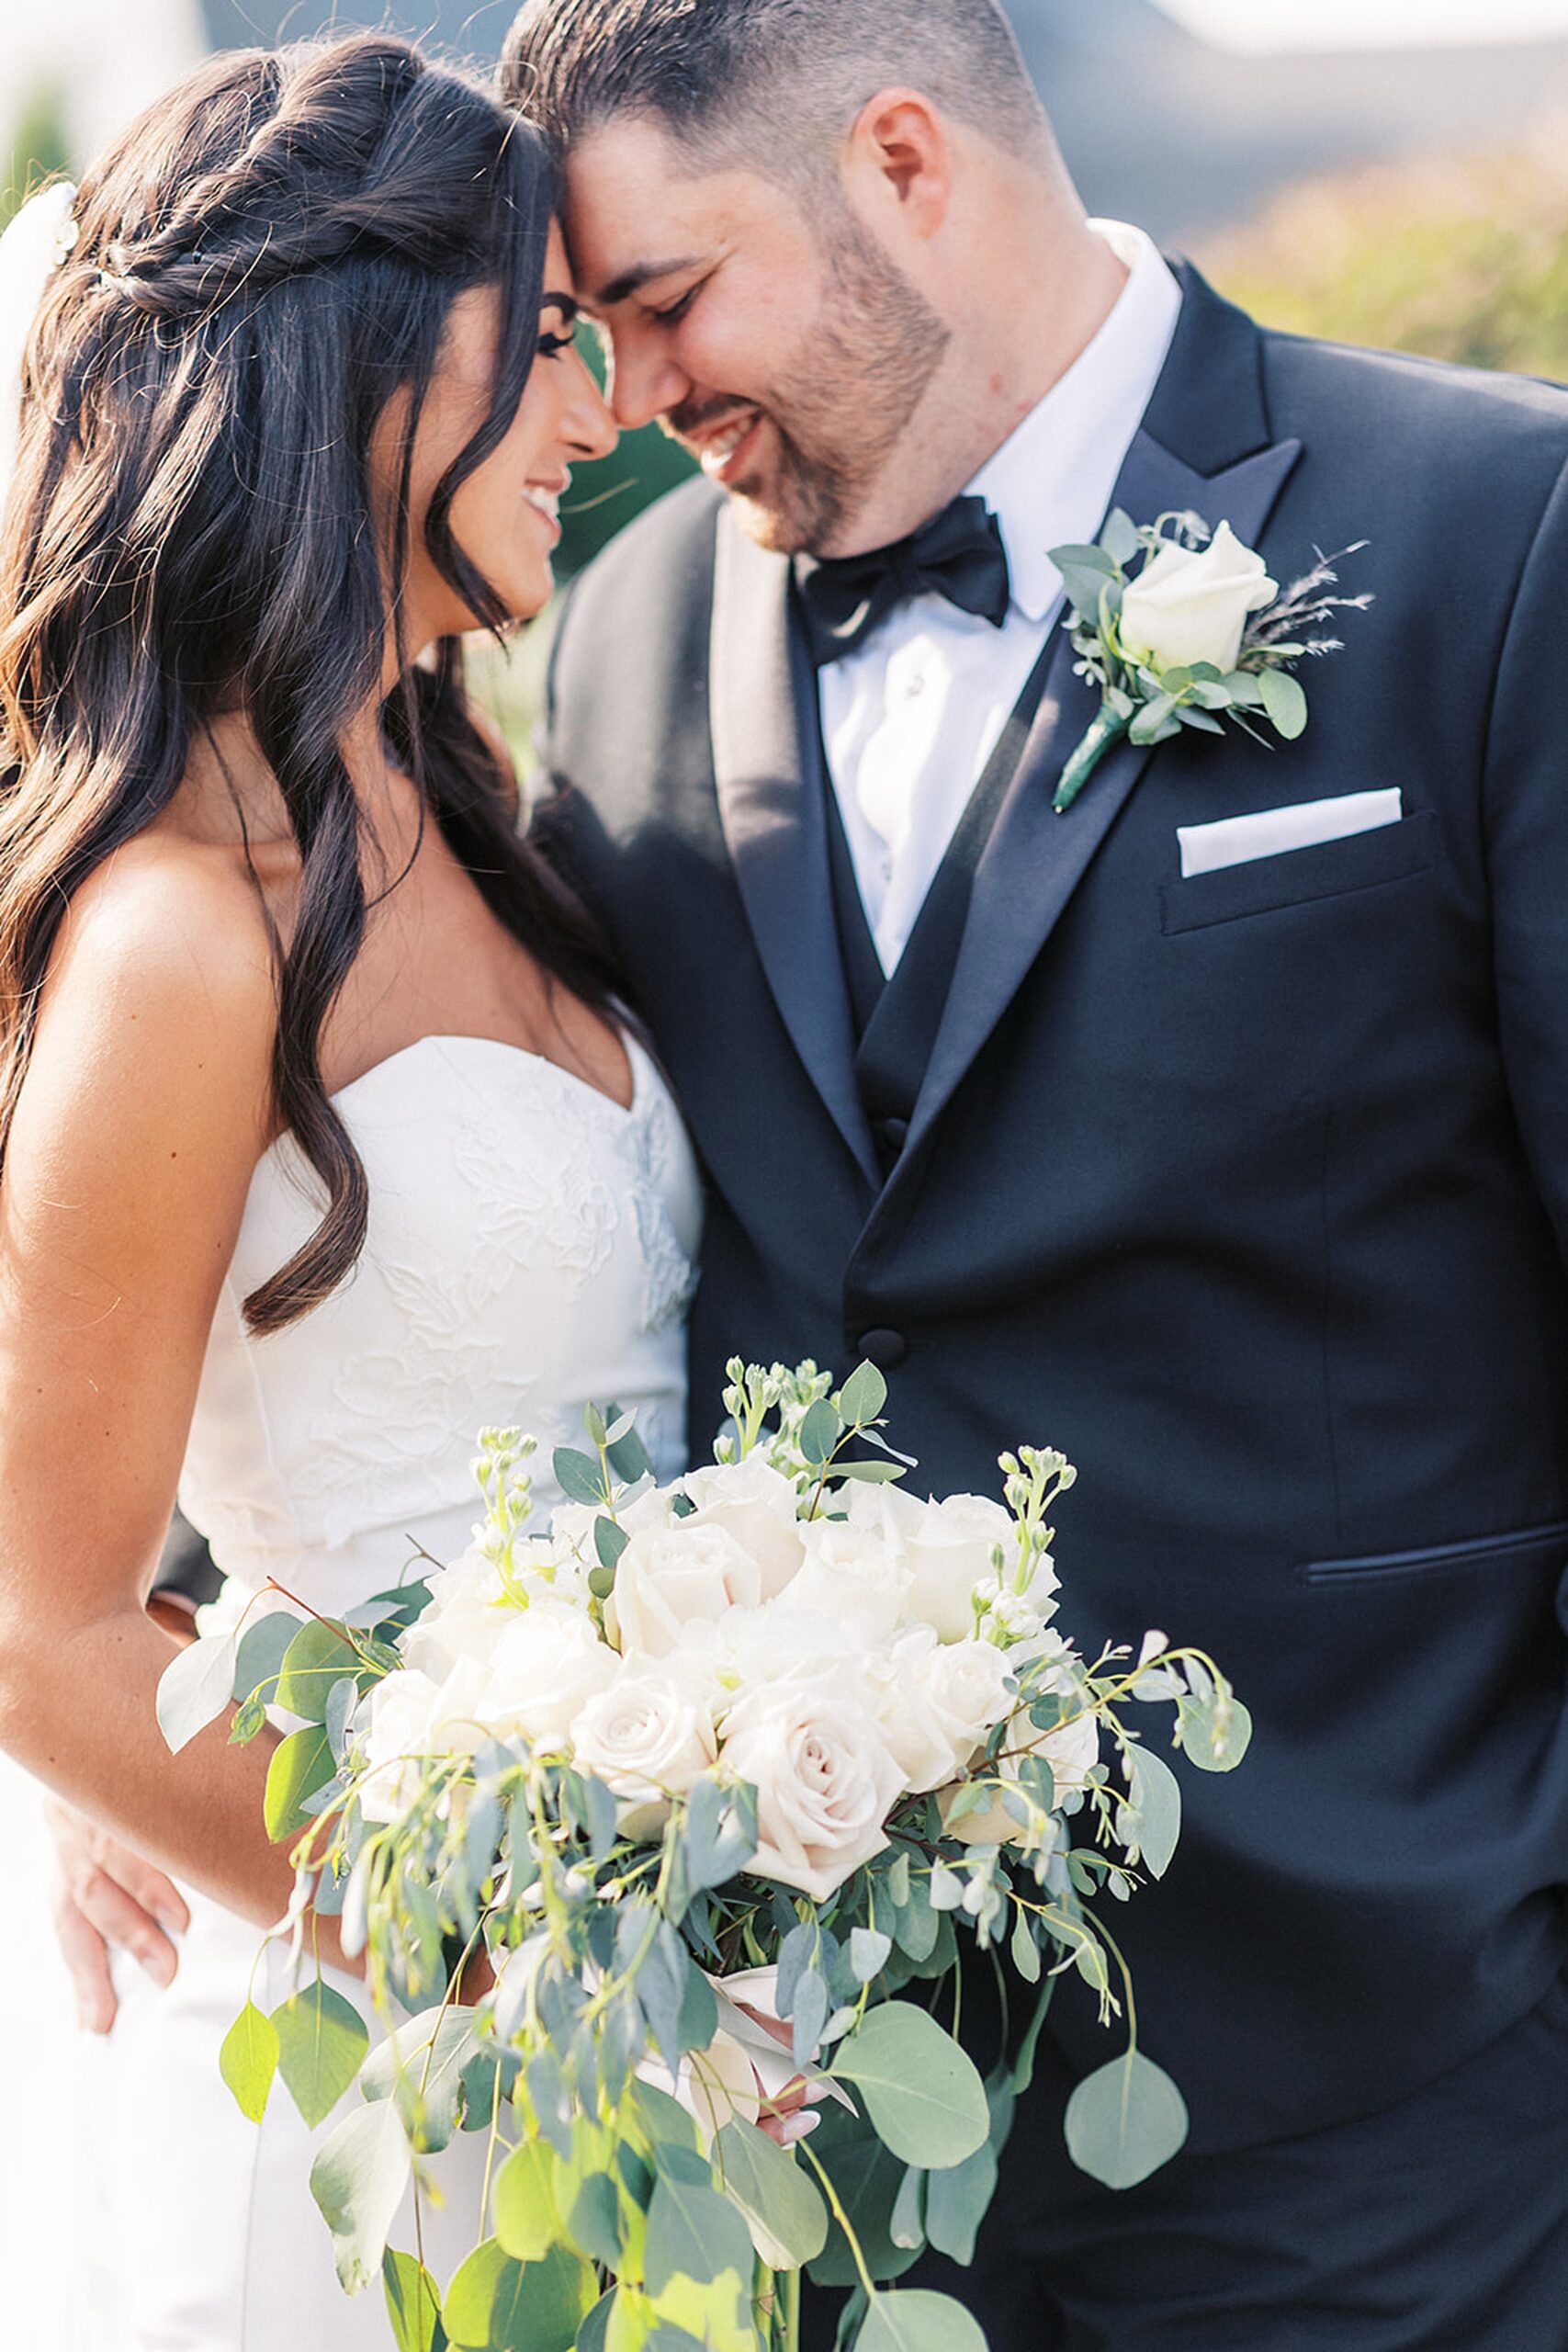 NEwlyweds embrace and touch foreheads at their edgewood country club wedding